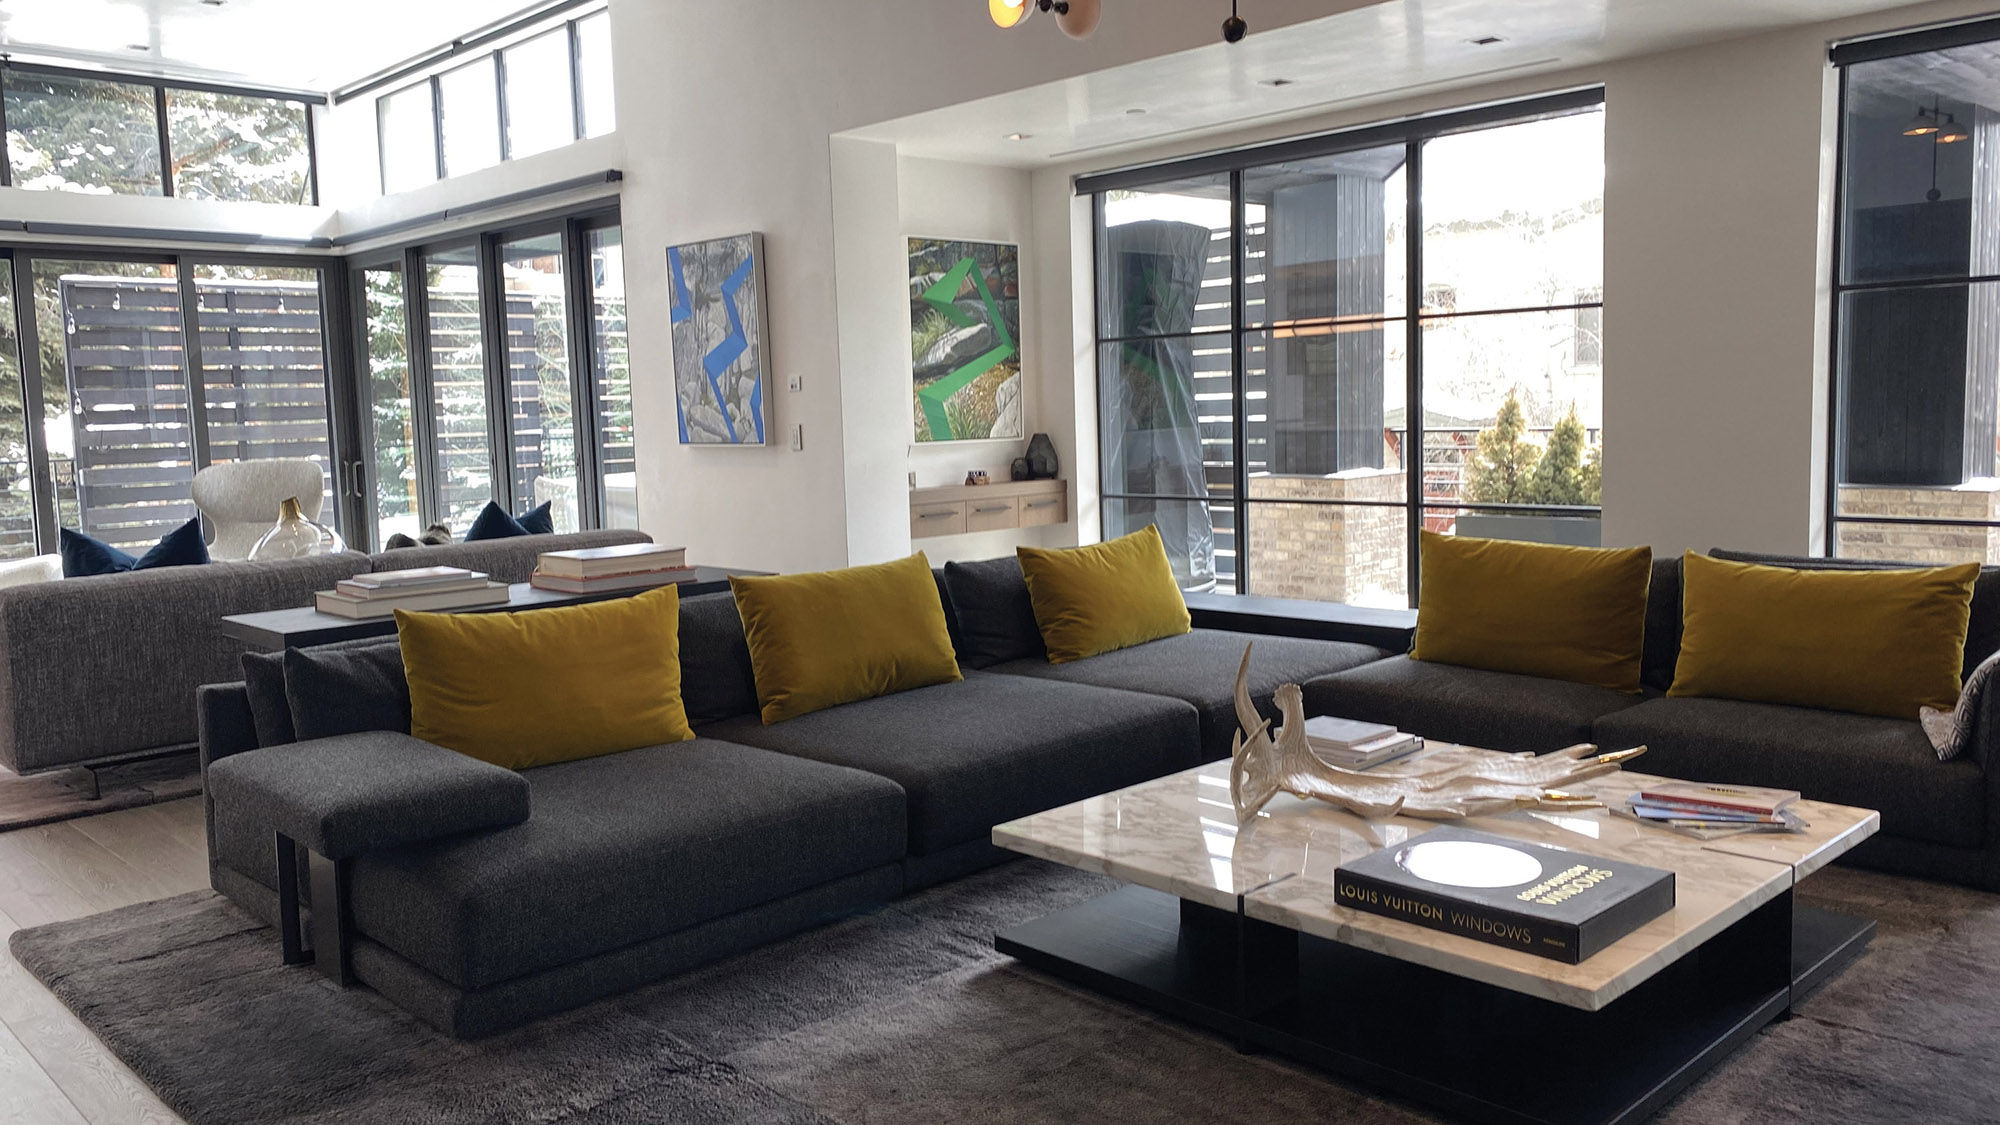 An alternative option for staying in Aspen-Snowmass is the Aspen Street Lodge, a buyout-only, 26-guest property. Pictured, a living room area at the property.